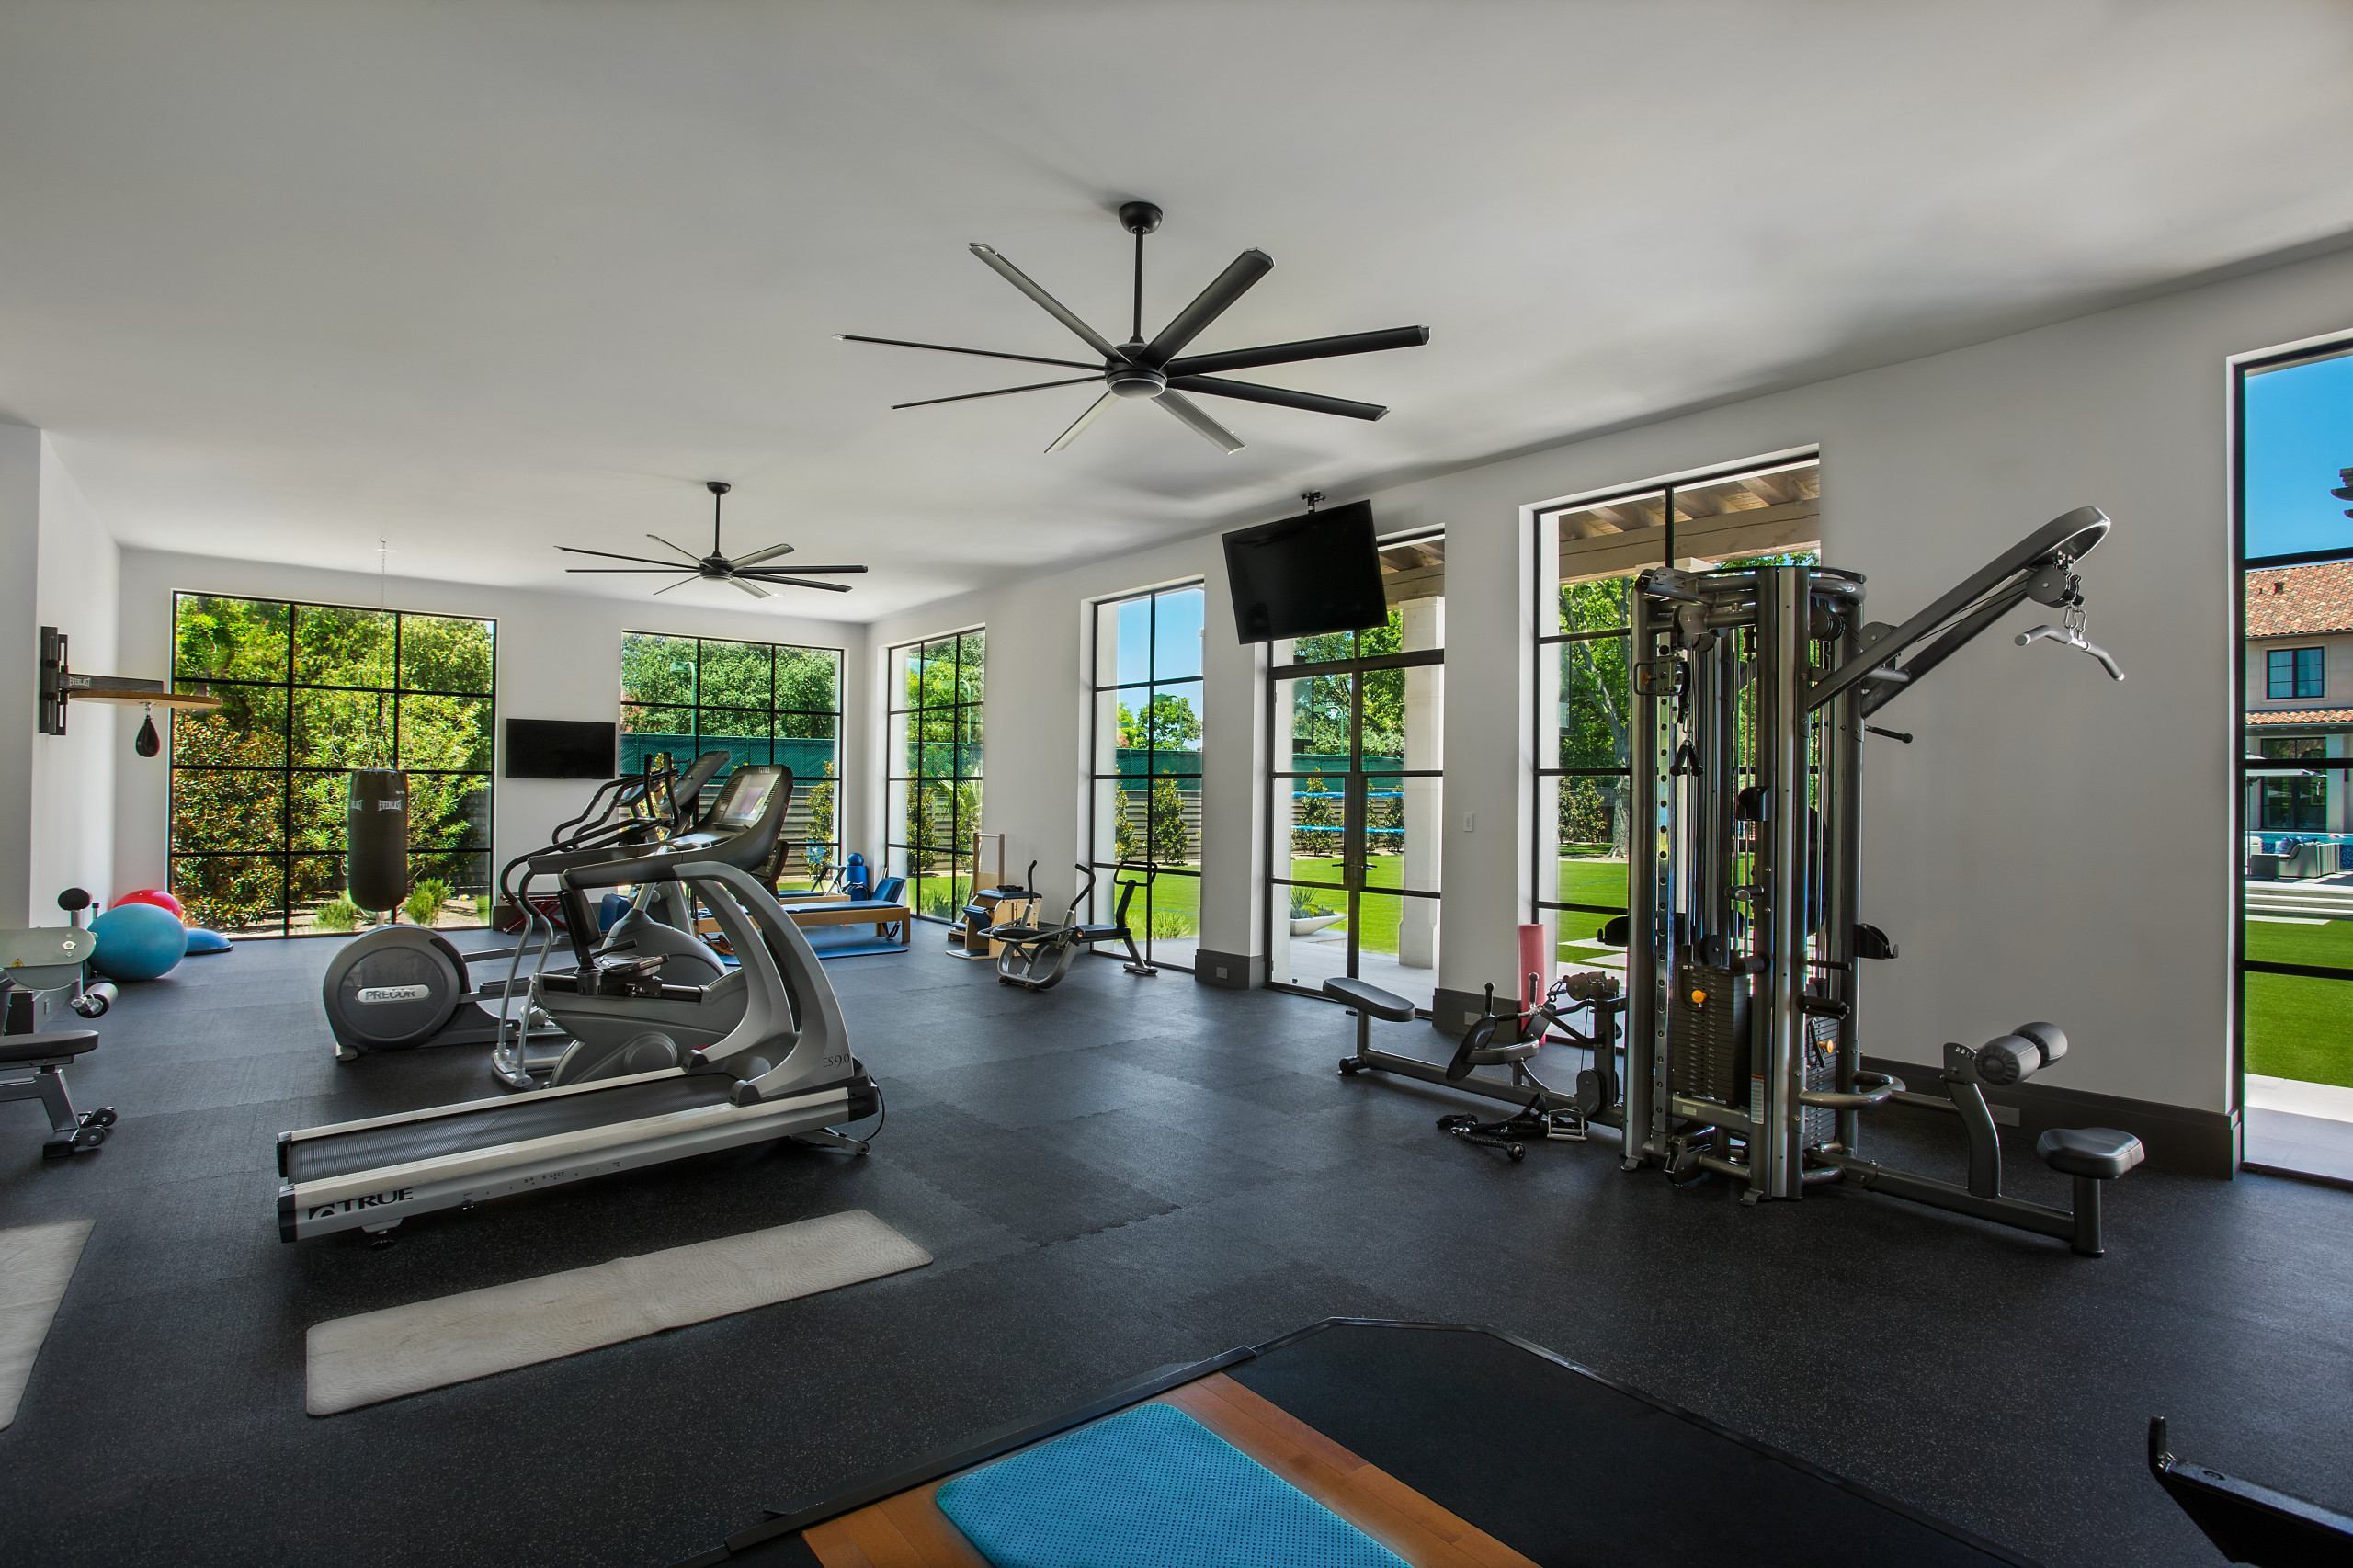 Reasons Why a Home Gym Is Appropriate